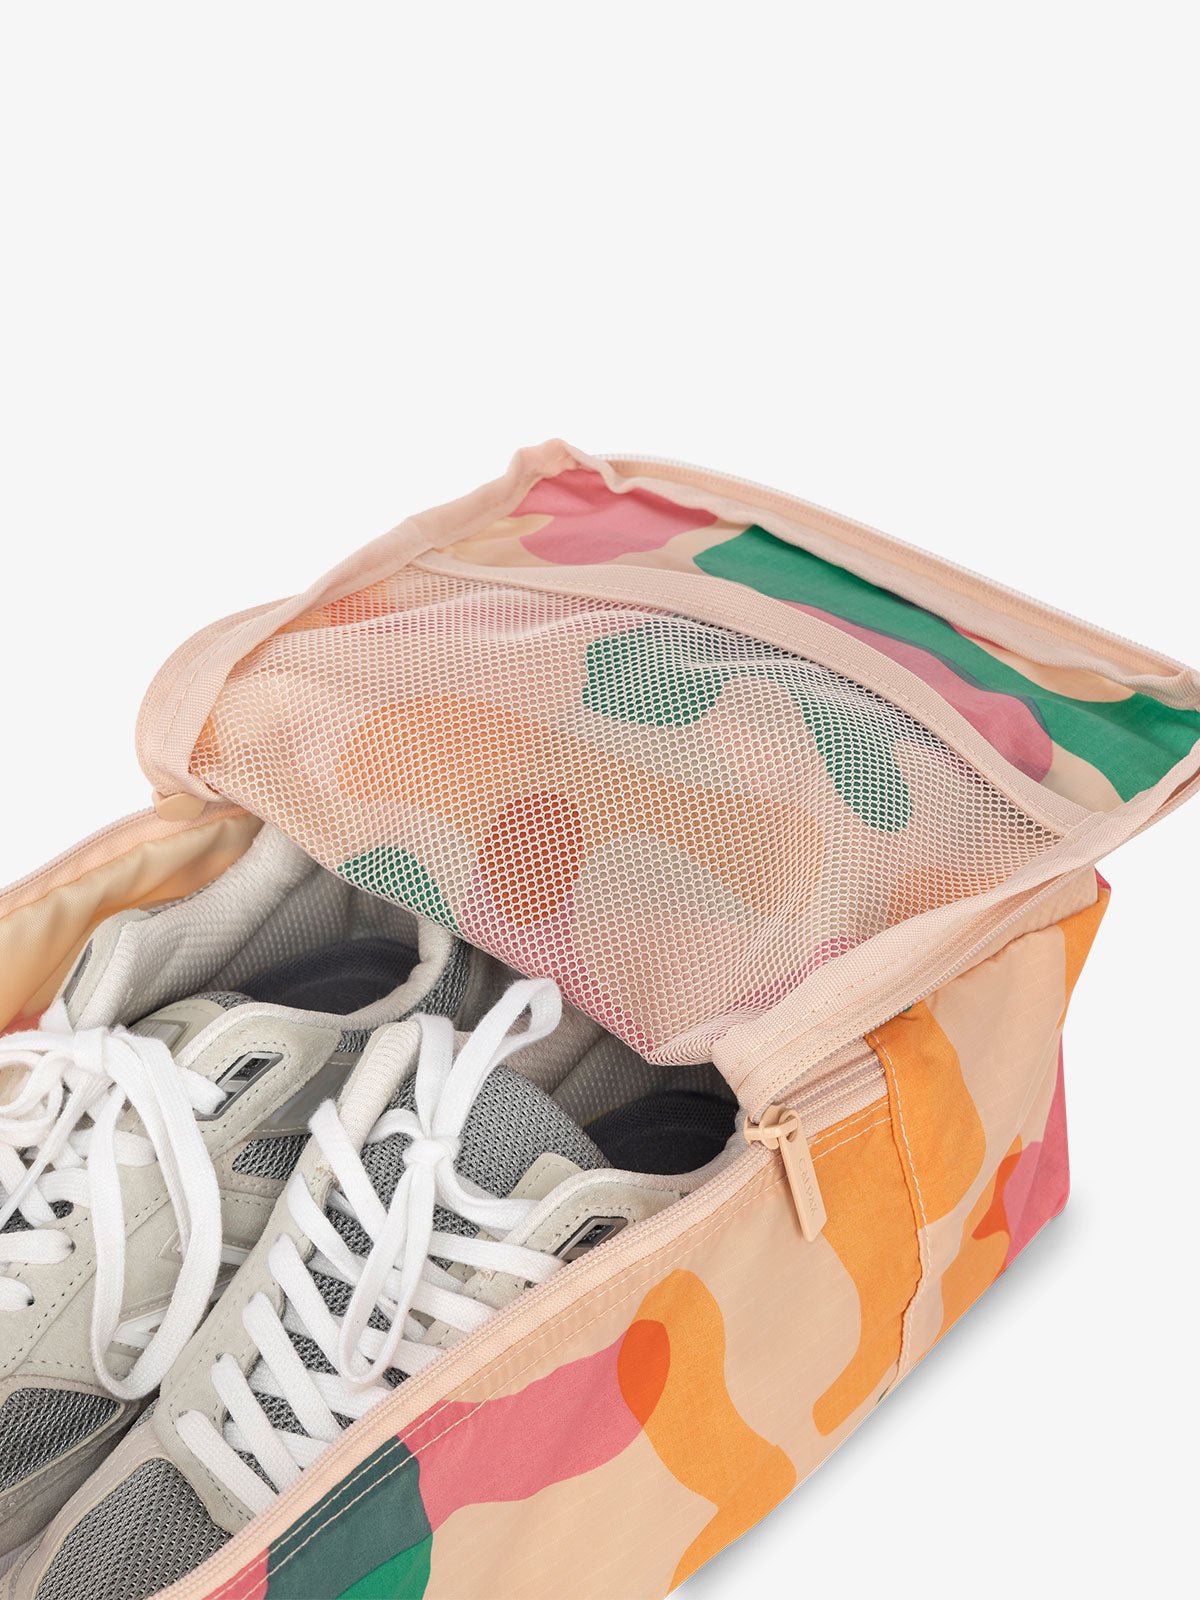 CALPAK Compakt zippered shoe travel bag with mesh pocket in pink and green abstract print